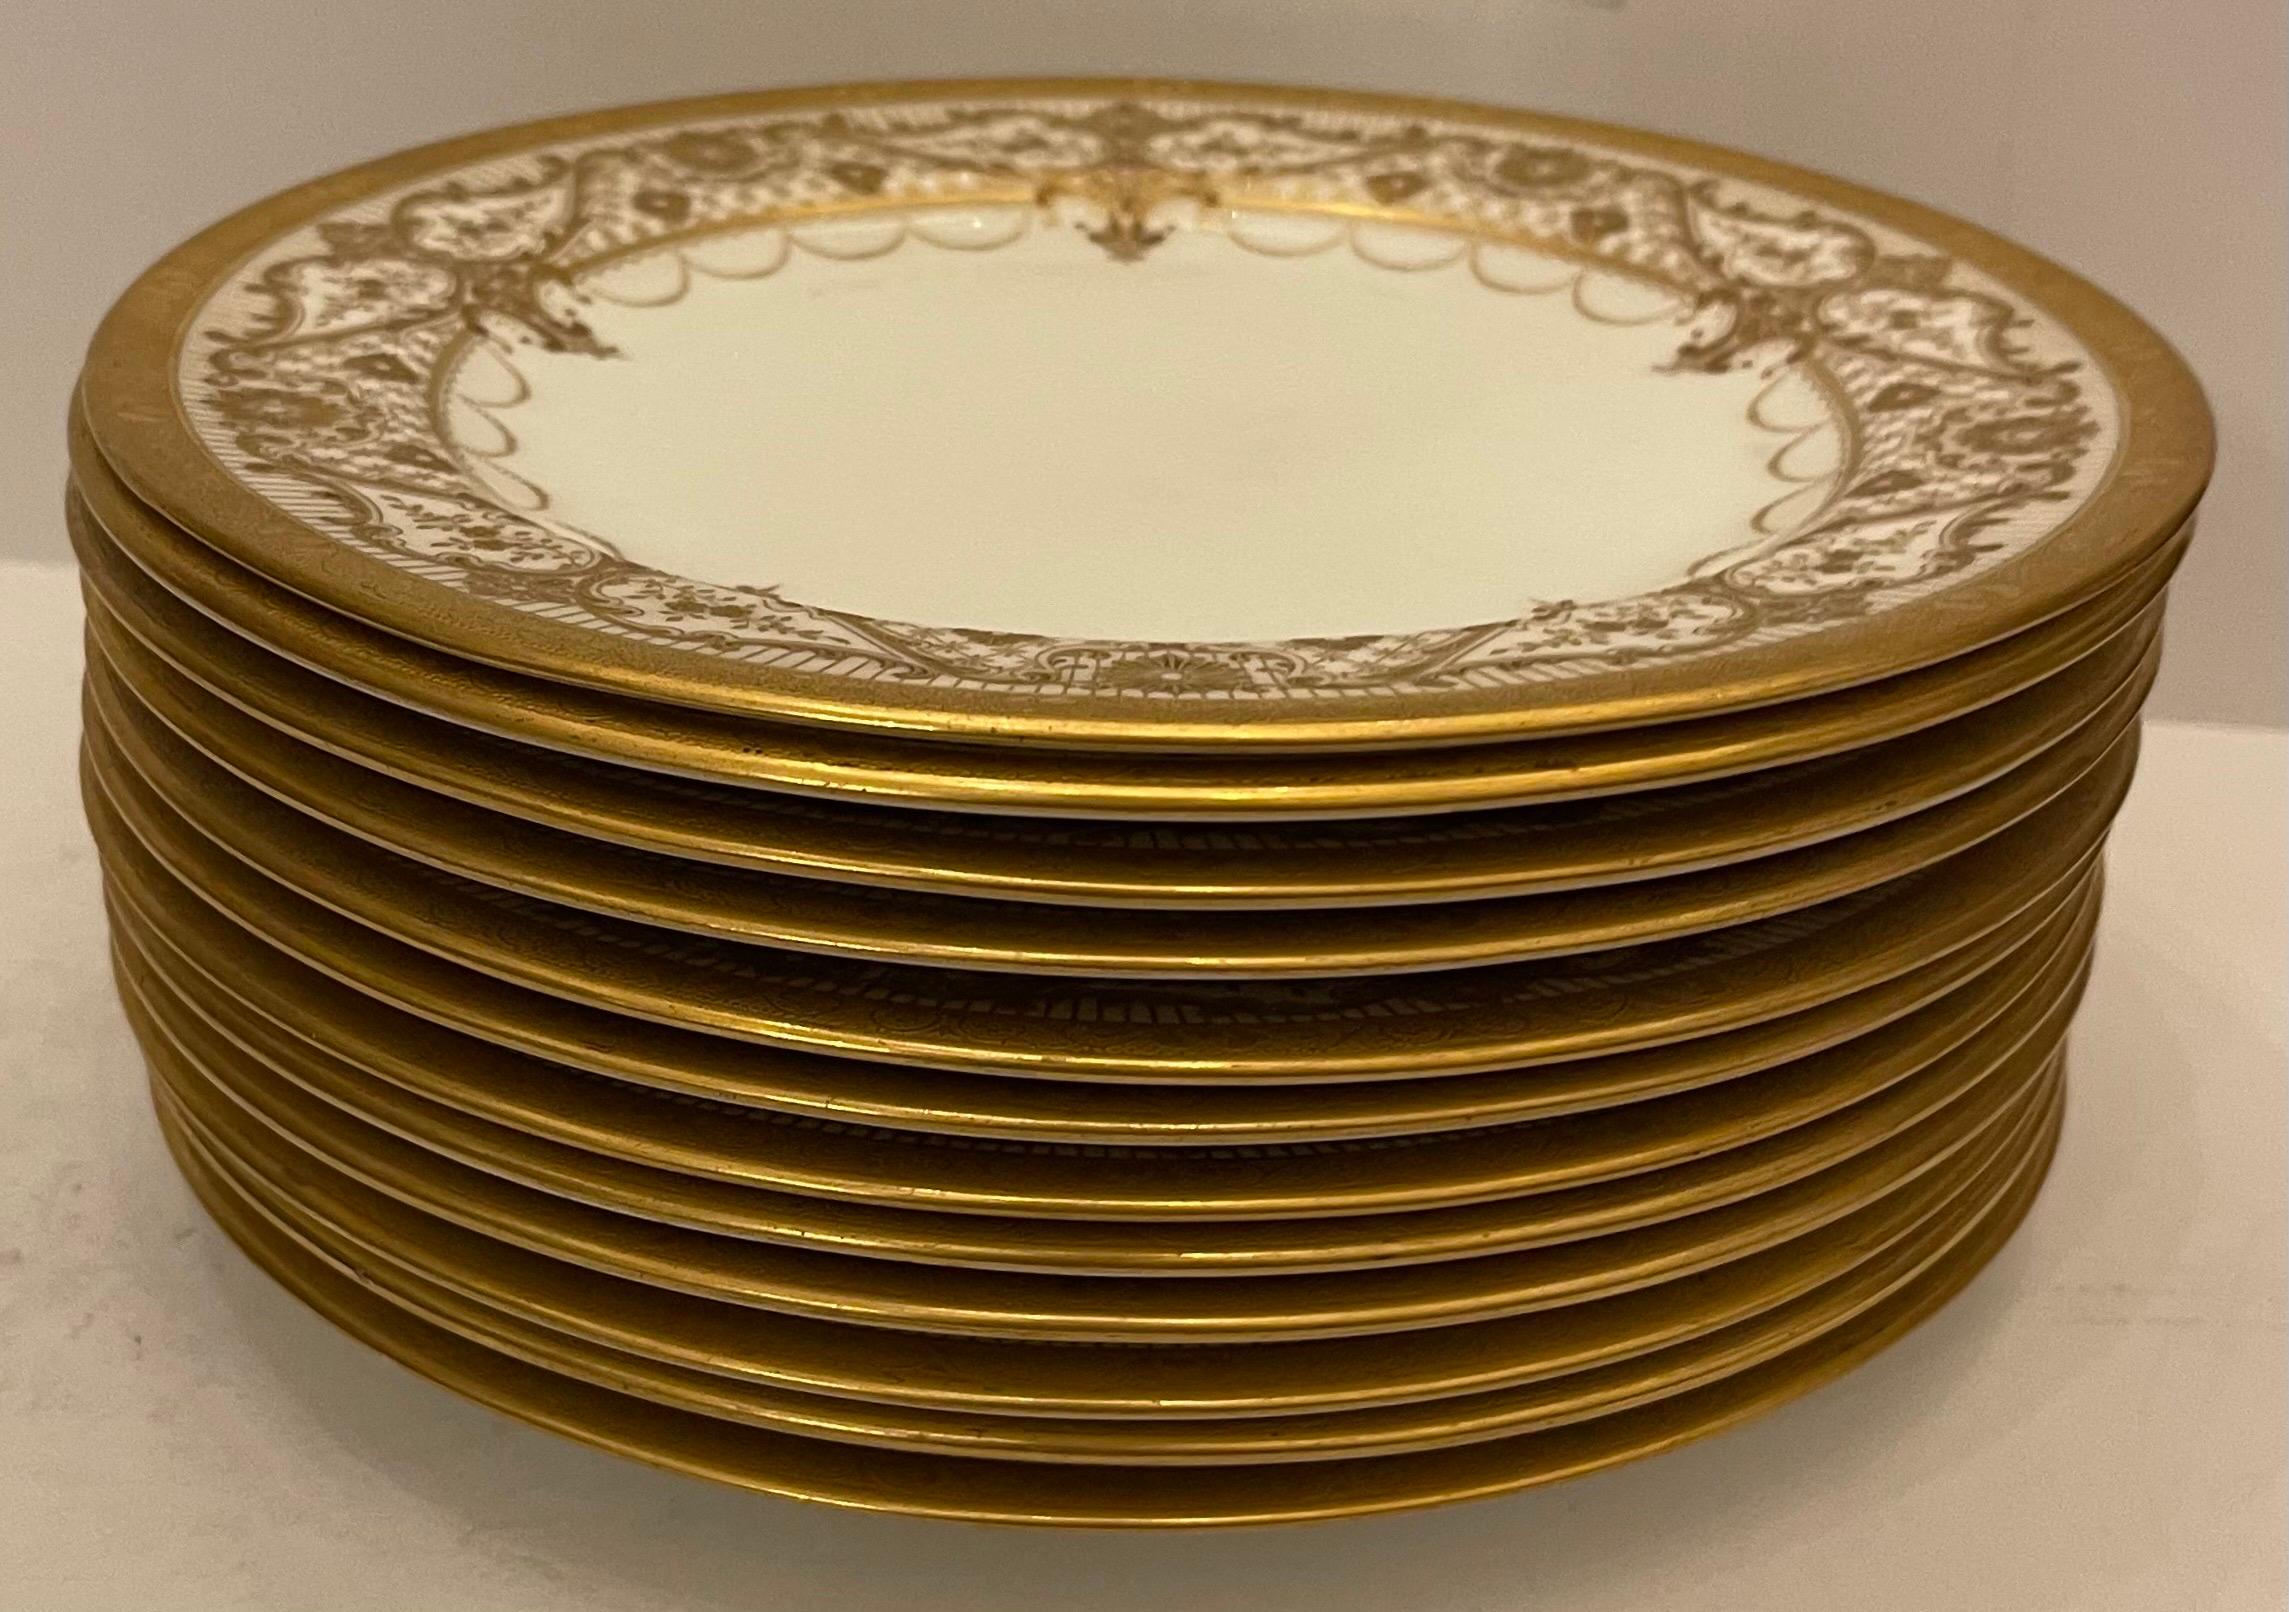 A wonderful service of cauldon England consisting of set 12 lunch / dessert plates with raised gold encrusted border rim.
Retailed By:
Higgind & Seiter New York.